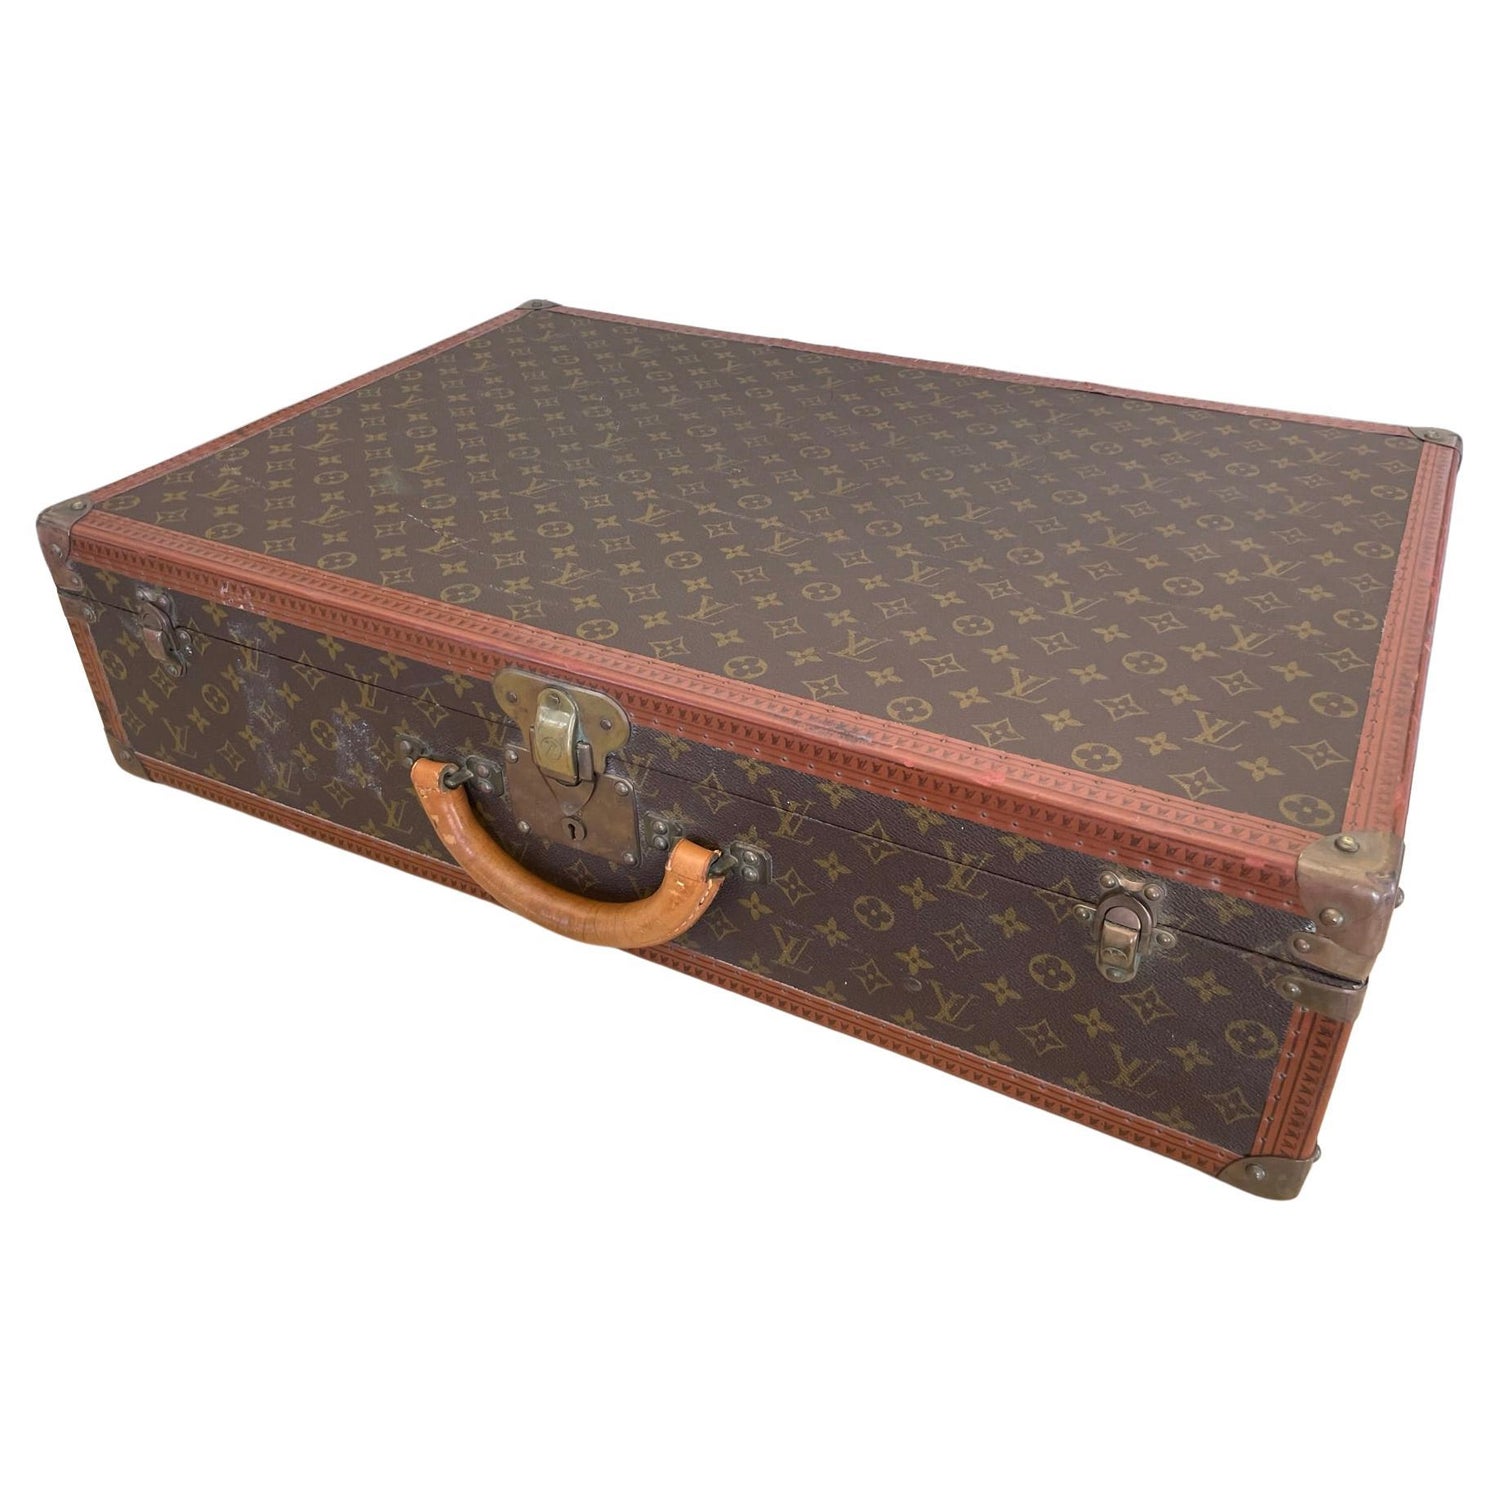 Sold at Auction: (3pc) LOUIS VUITTON HARD LUGGAGE